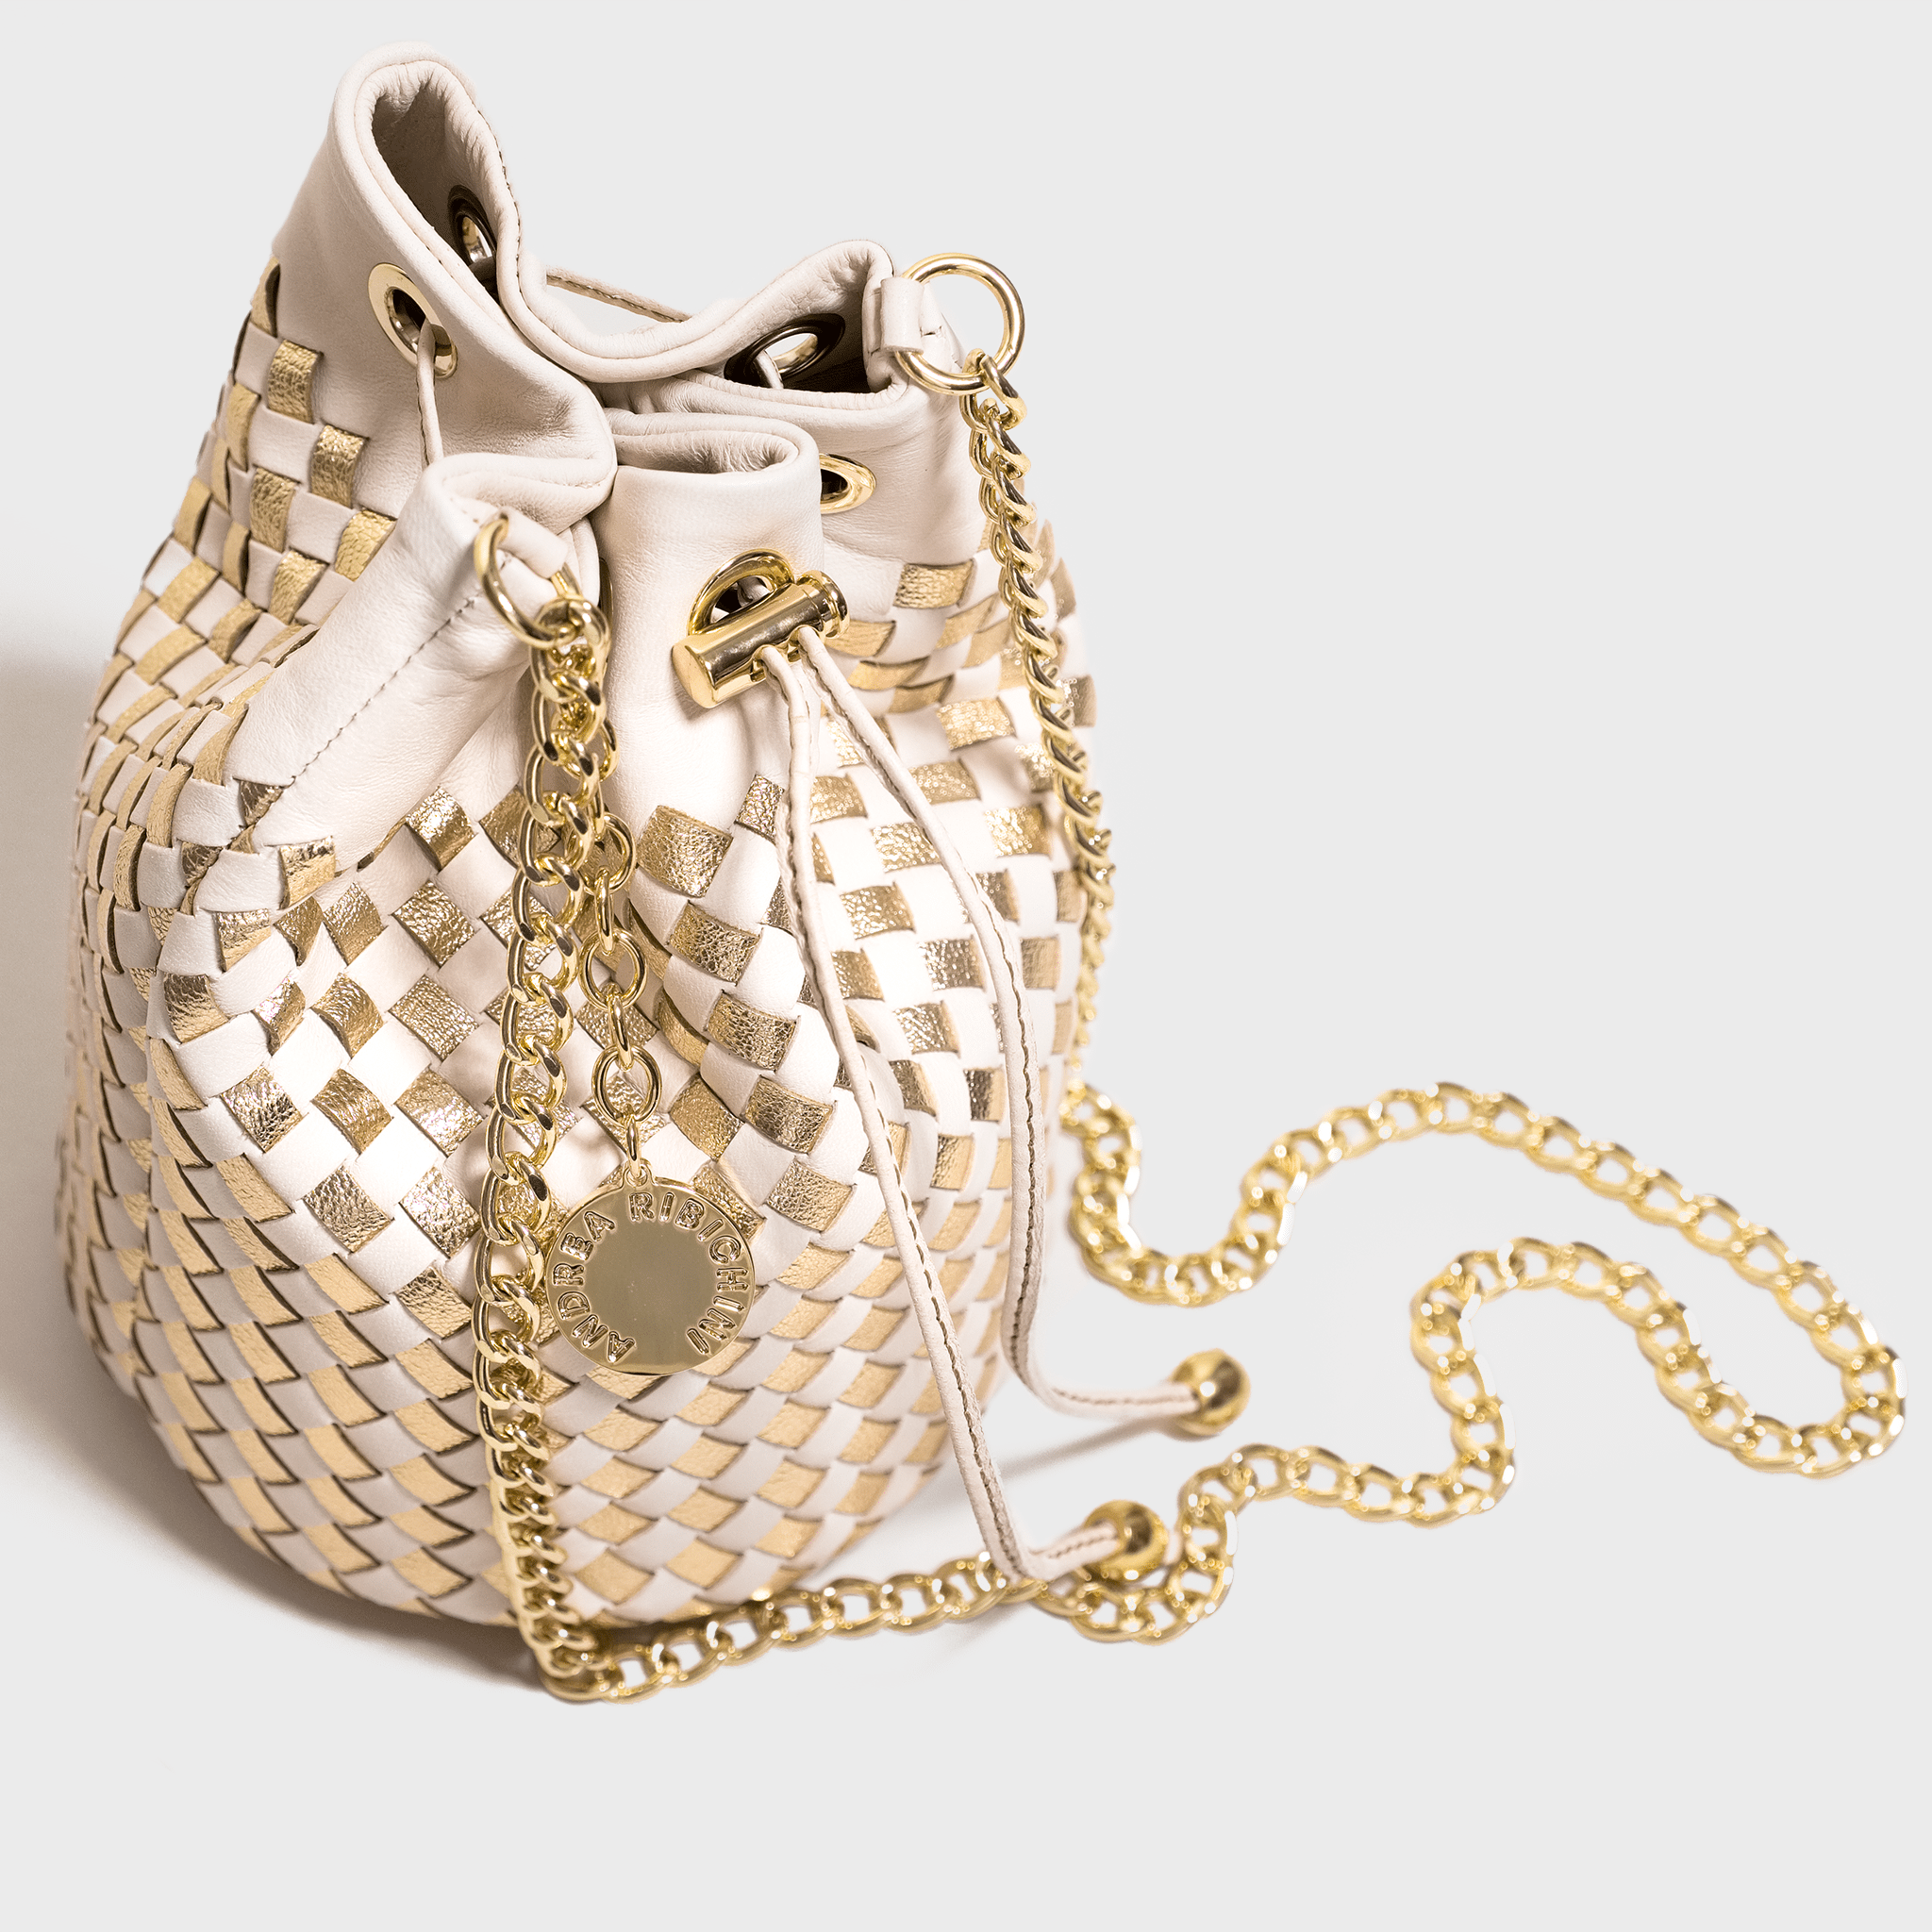 Cream woven leather bag Bucket bag with chain shoulder. Handmade in Italy